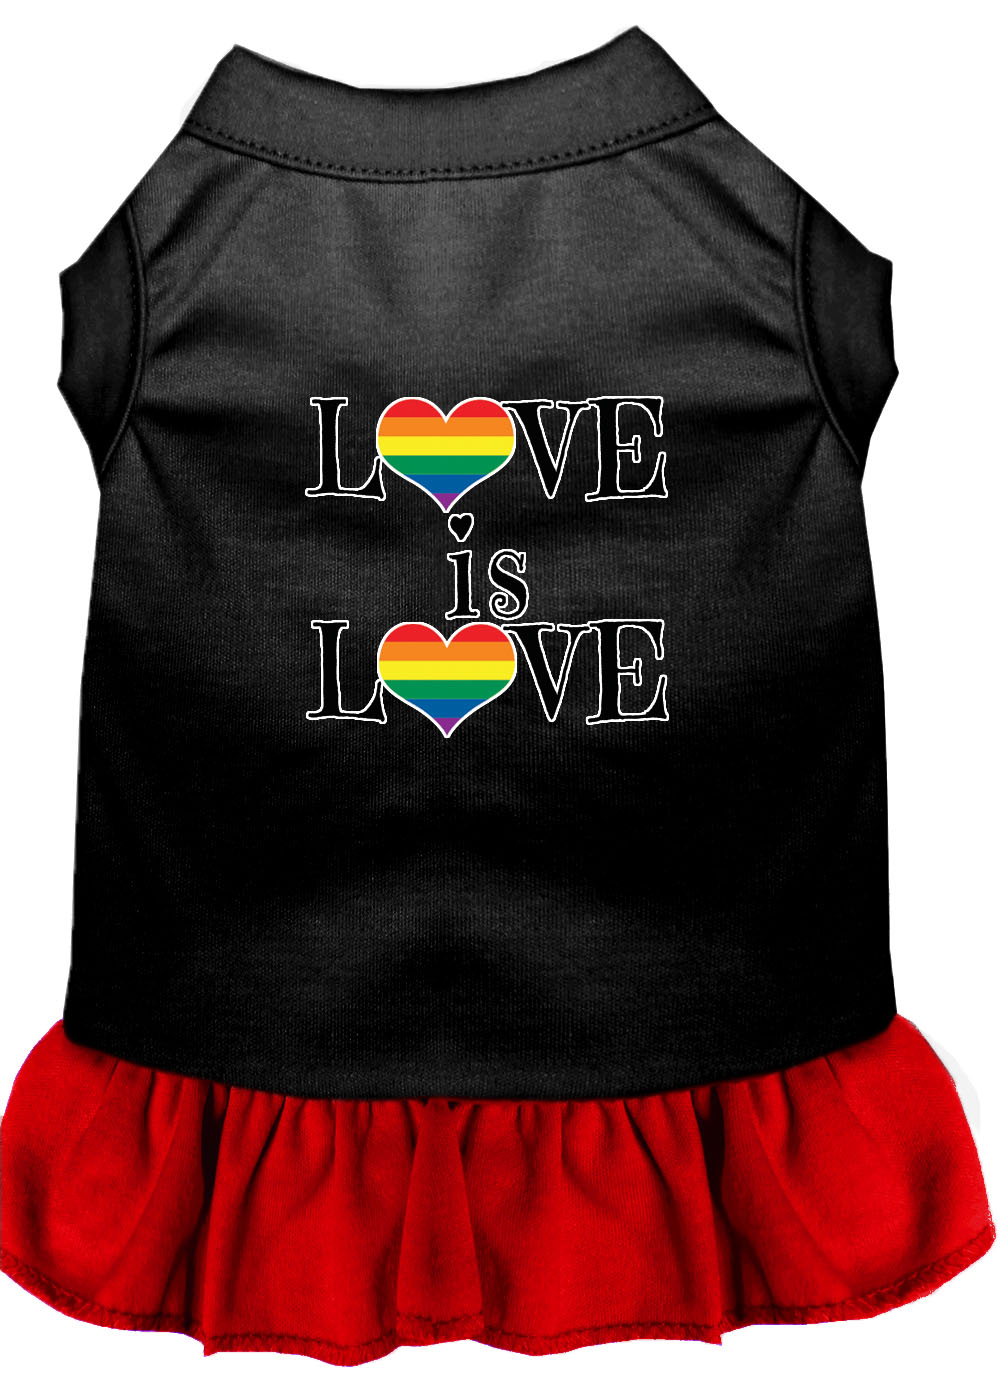 Love is Love Screen Print Dog Dress Black with Red Lg